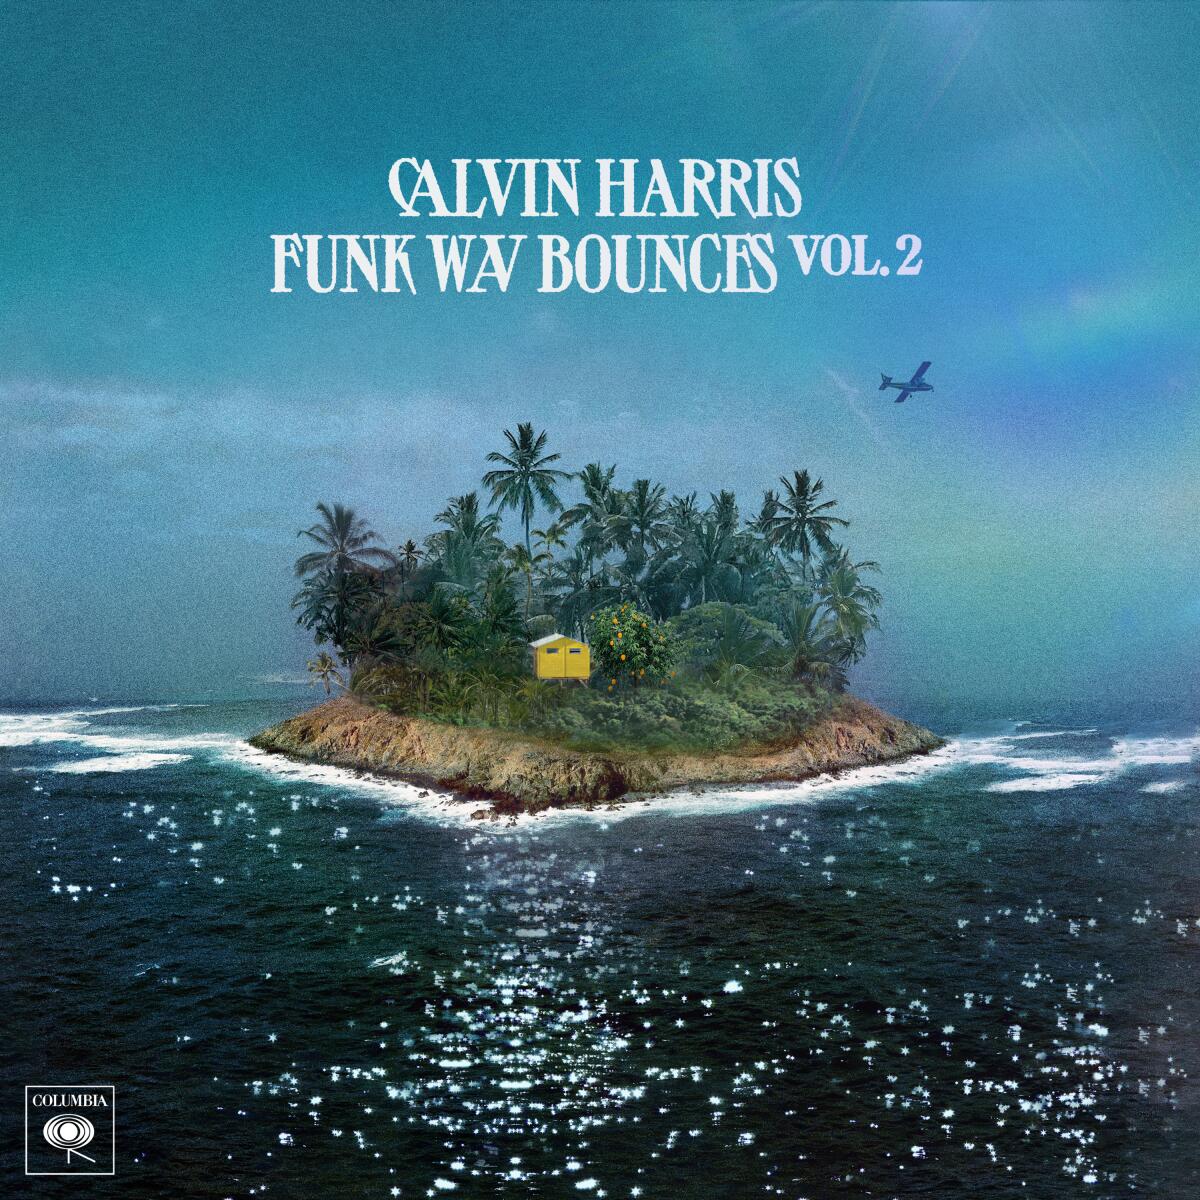 This cover image released by Columbia Records shows “Funk Wav Bounces Vol. 2” by Calvin Harris. (Columbia Records via AP)